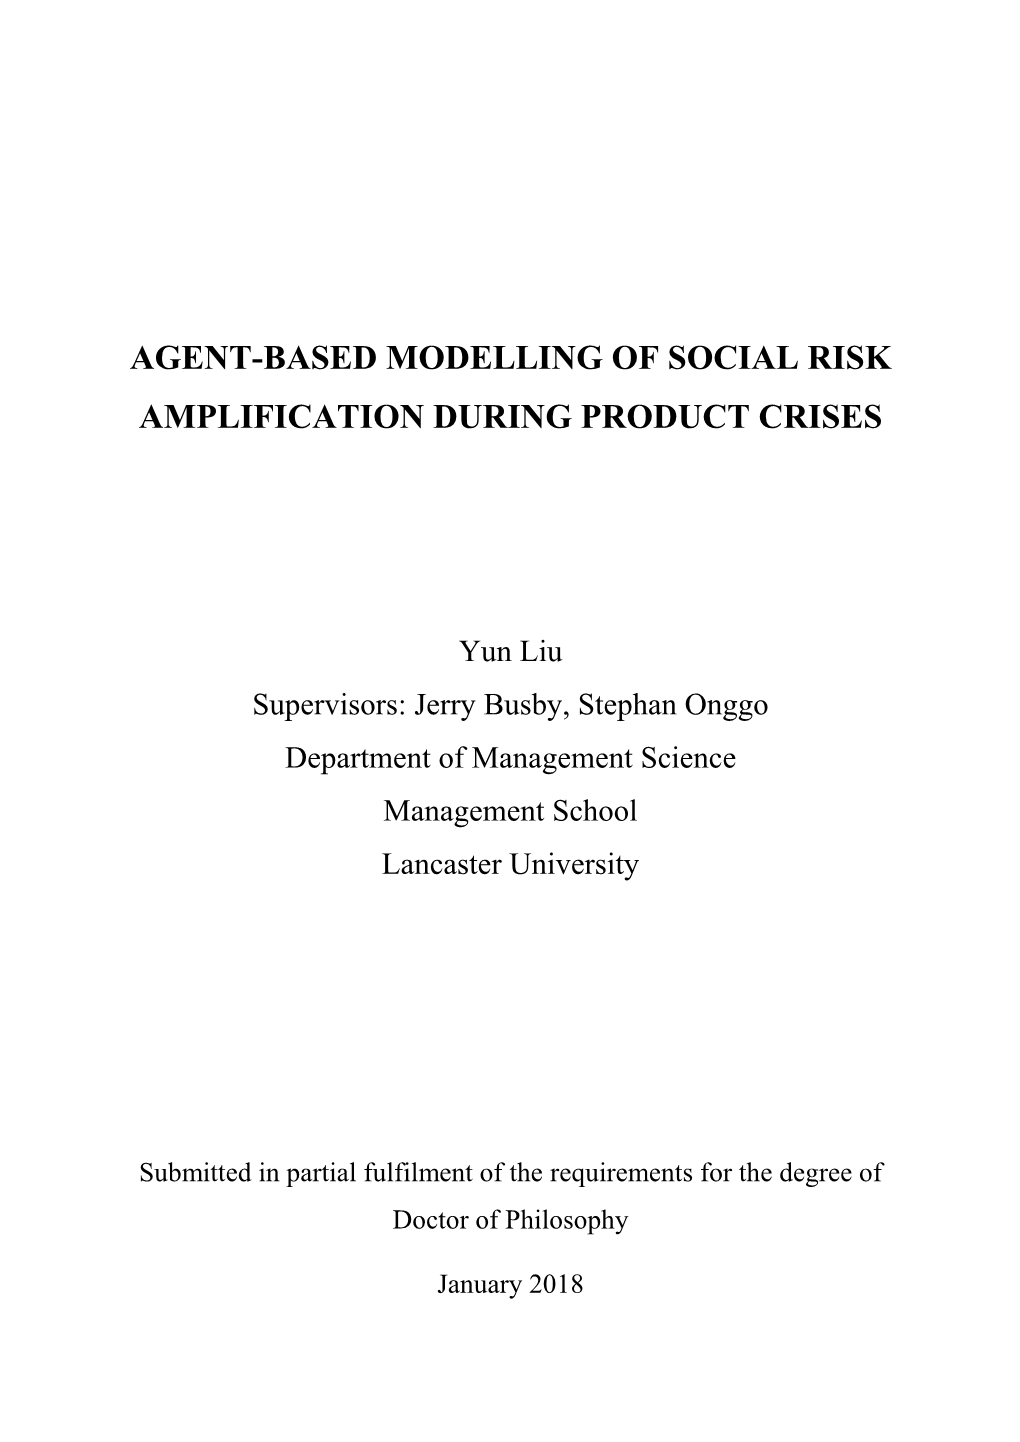 Agent-Based Modelling of Social Risk Amplification During Product Crises